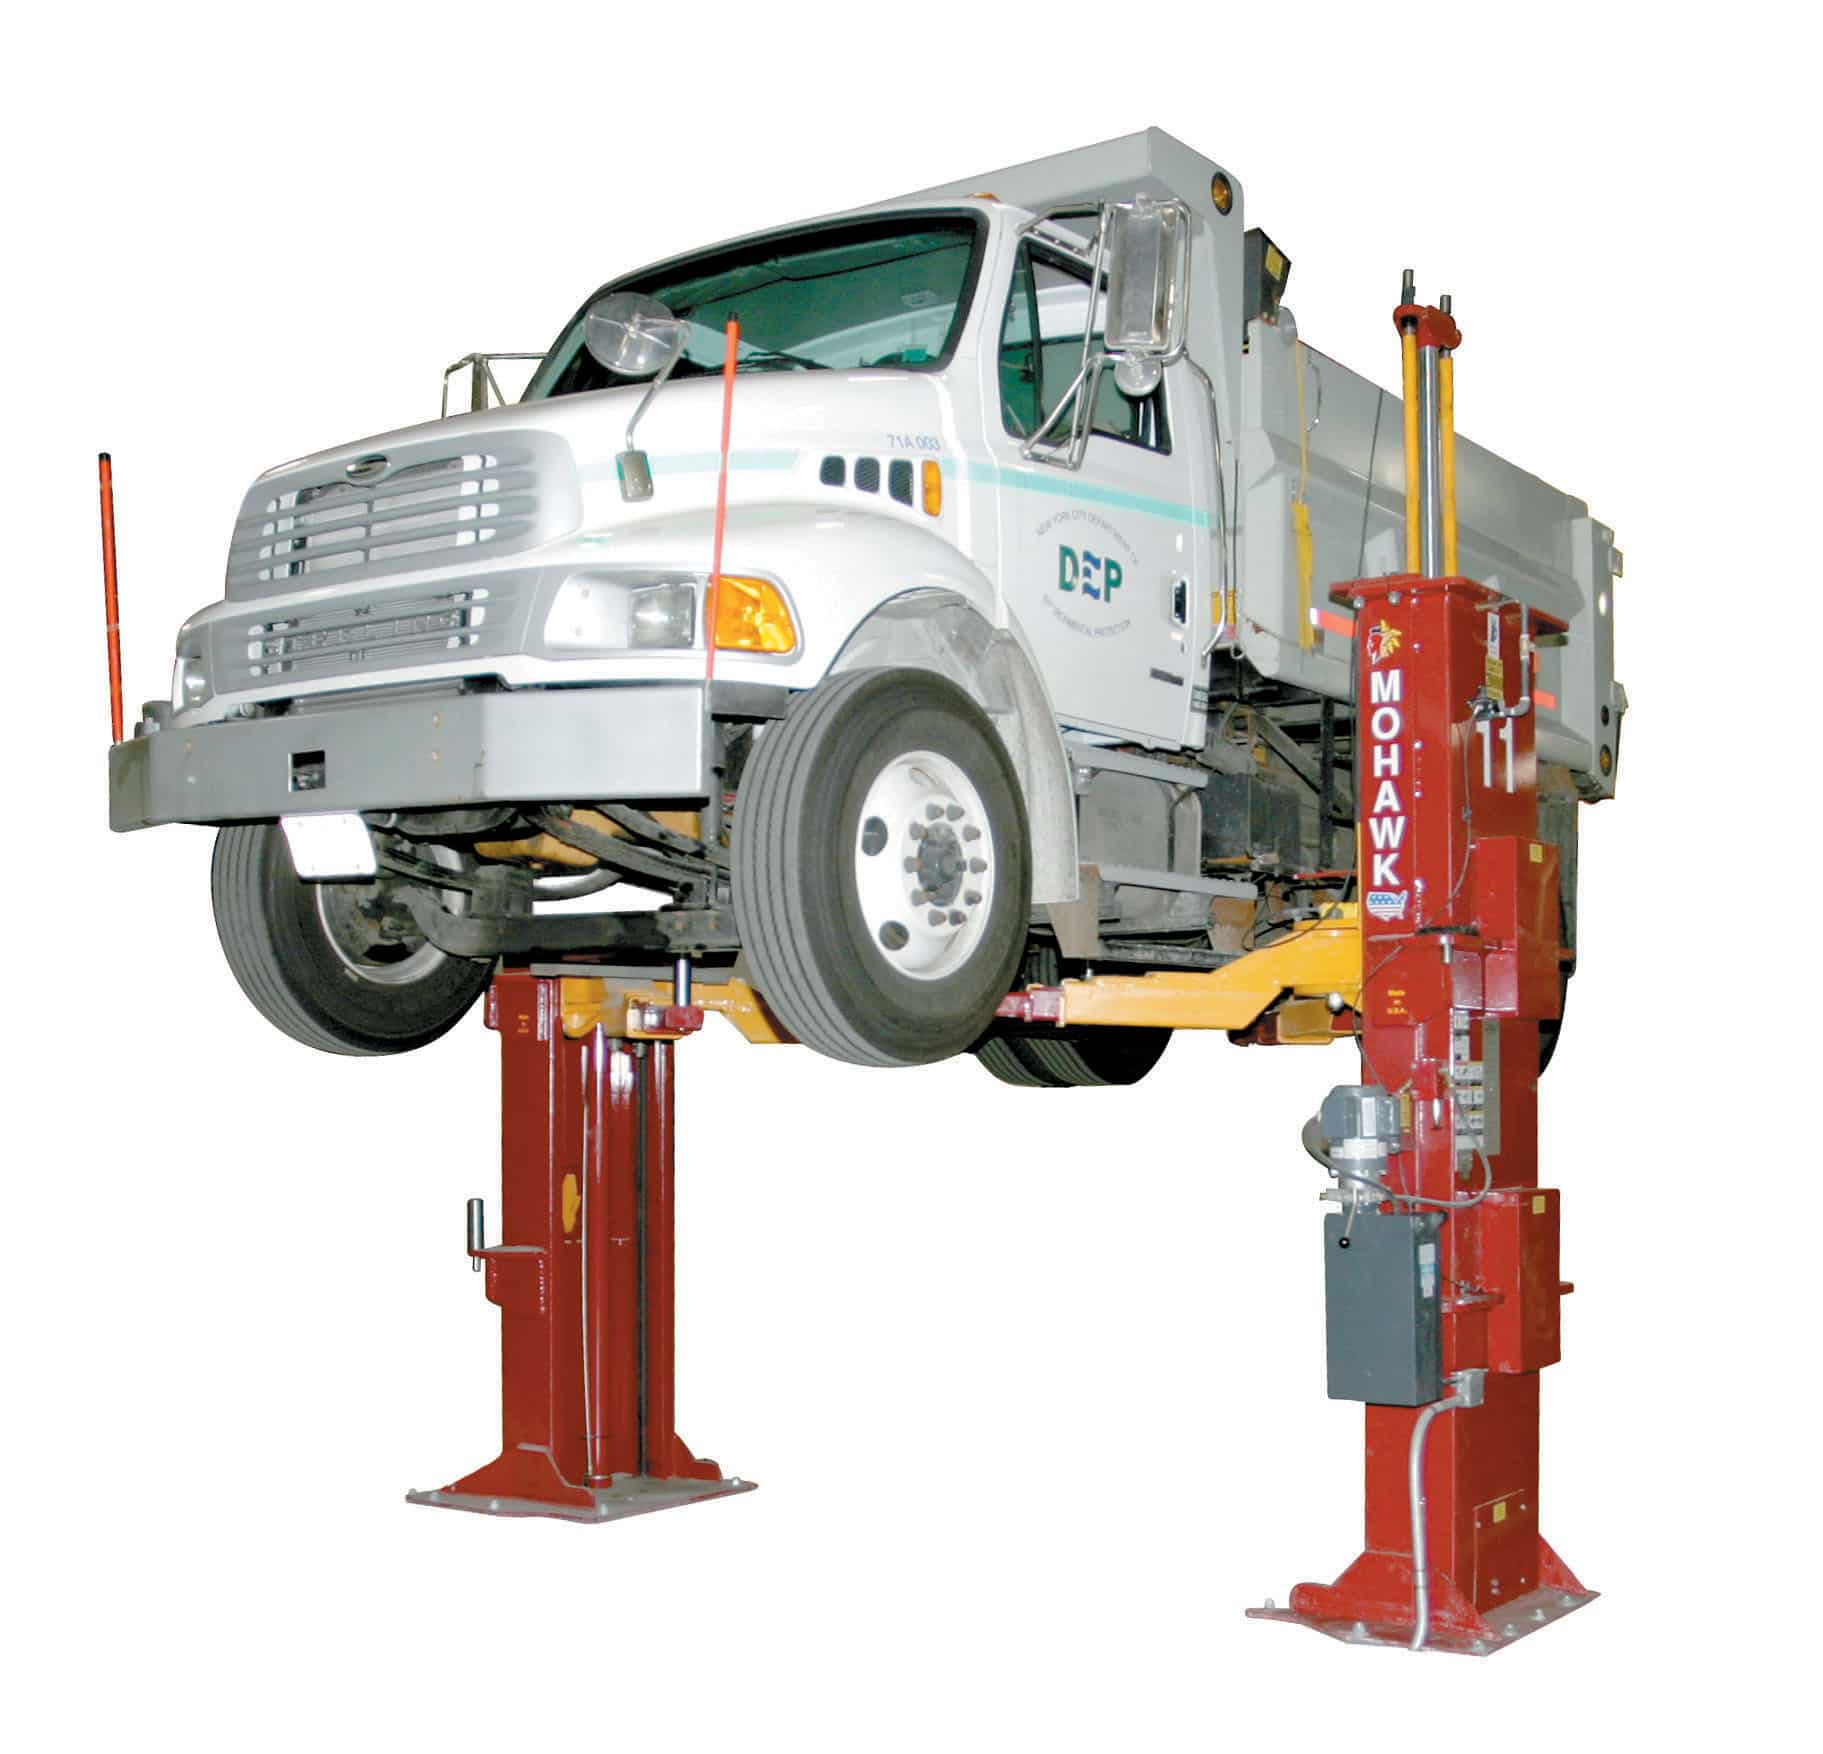 20,000 lbs Heavy Duty Two Post Lifts in New York